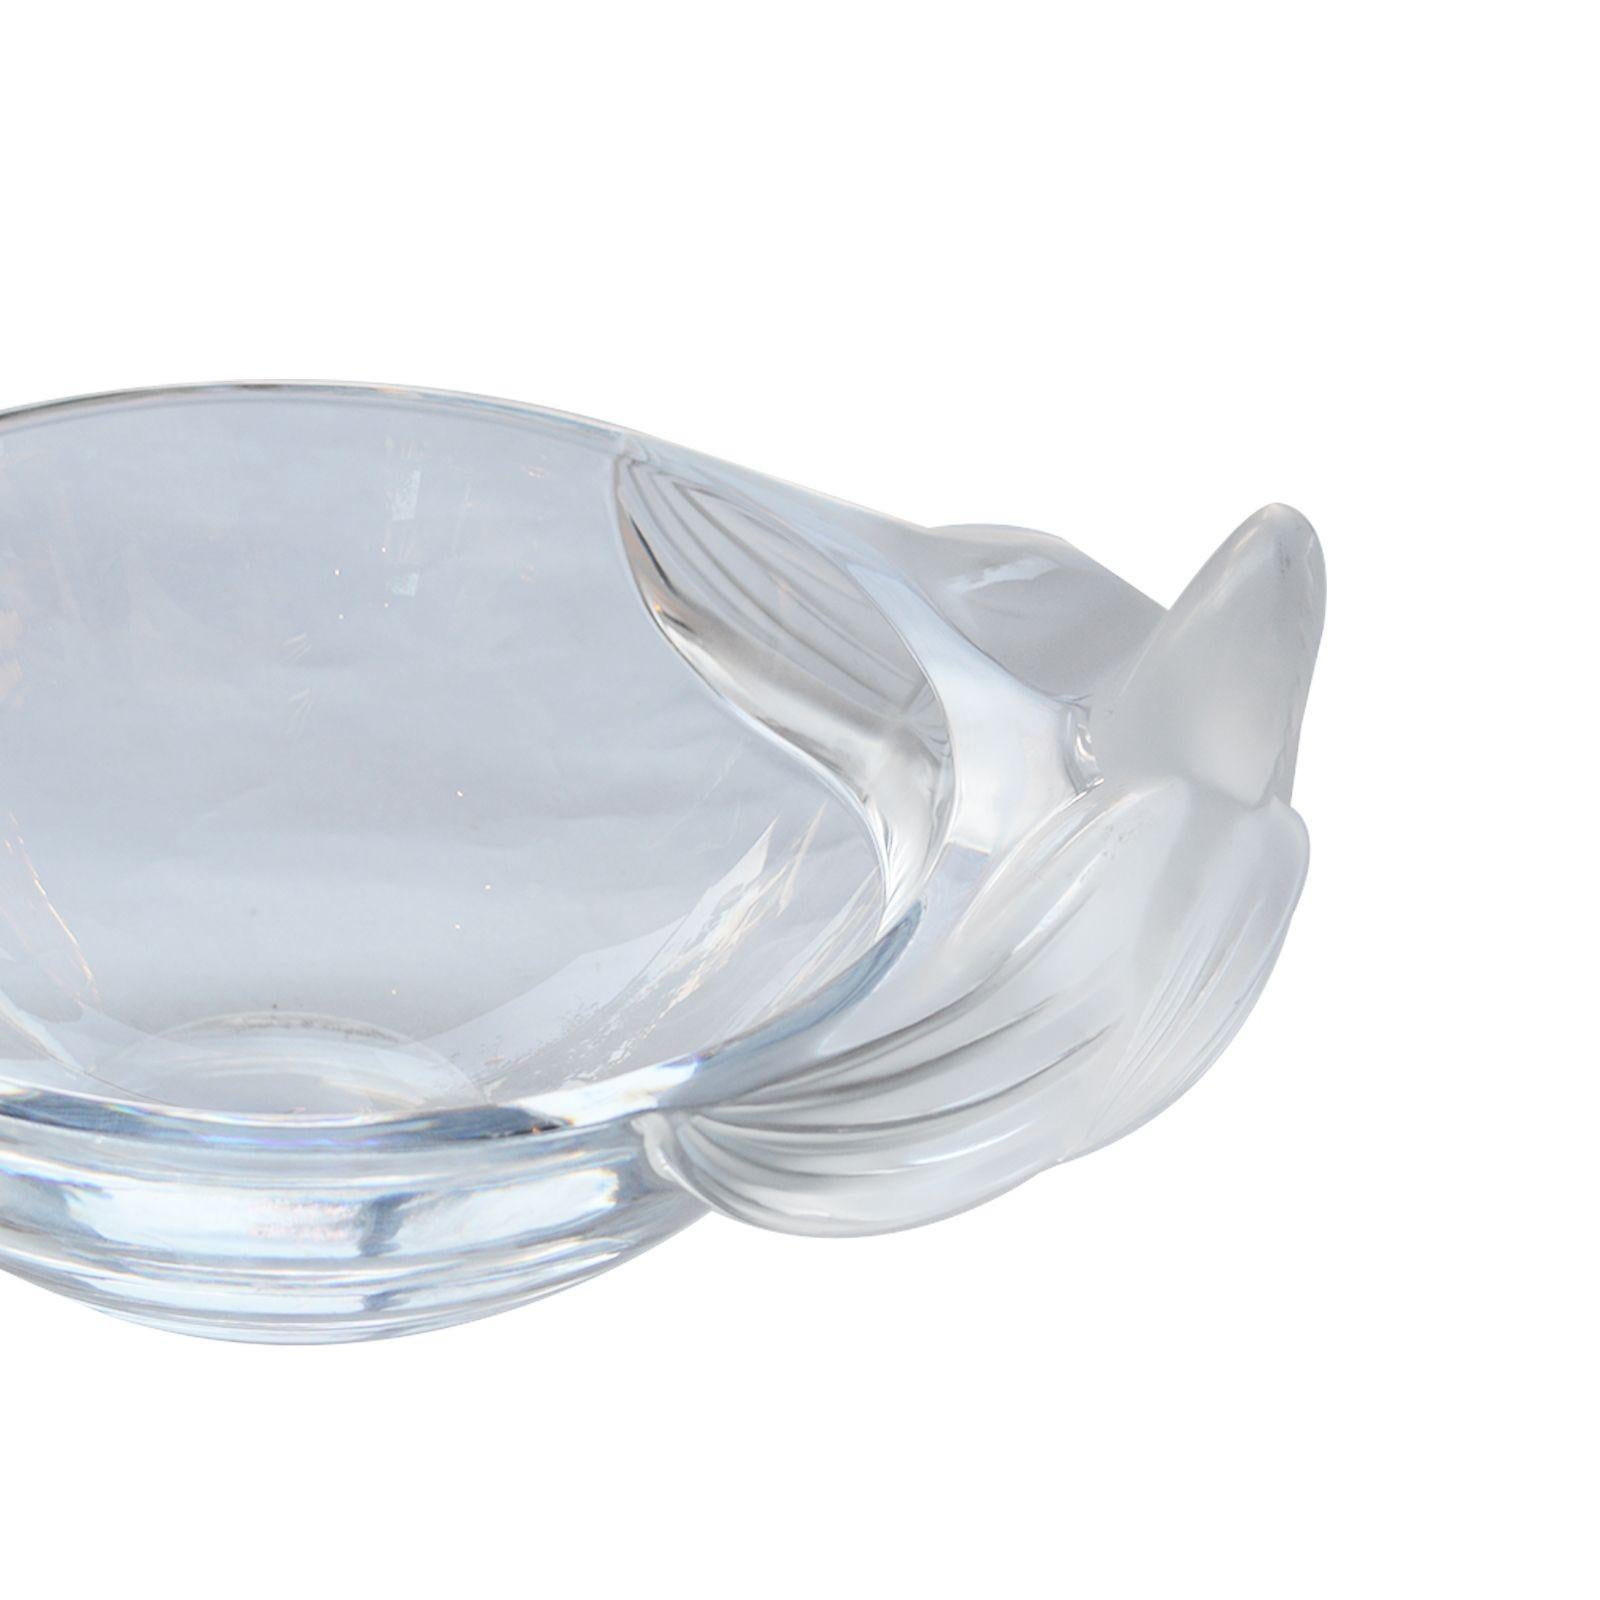 Beautiful signed lalique glass bowl with flowered details.